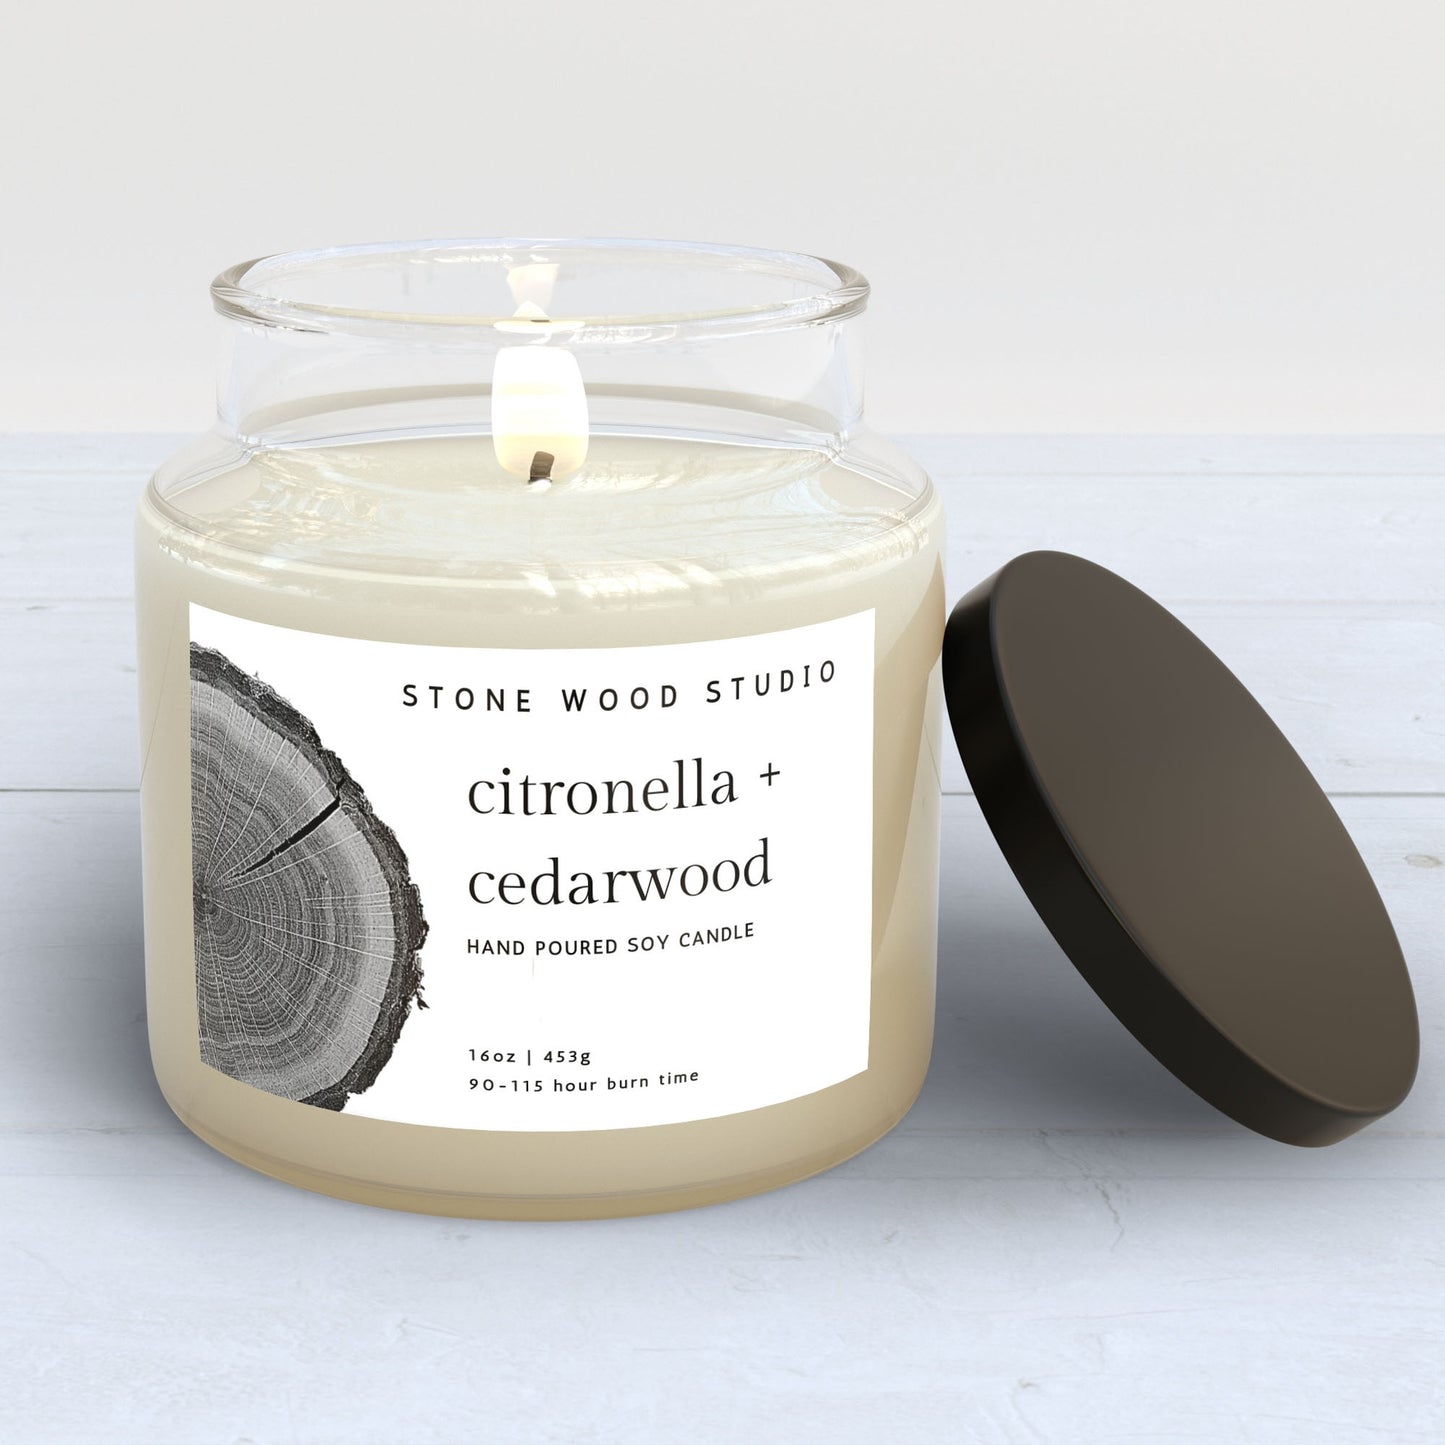 Citronella + Cedarwood Hand Poured Soy Candle